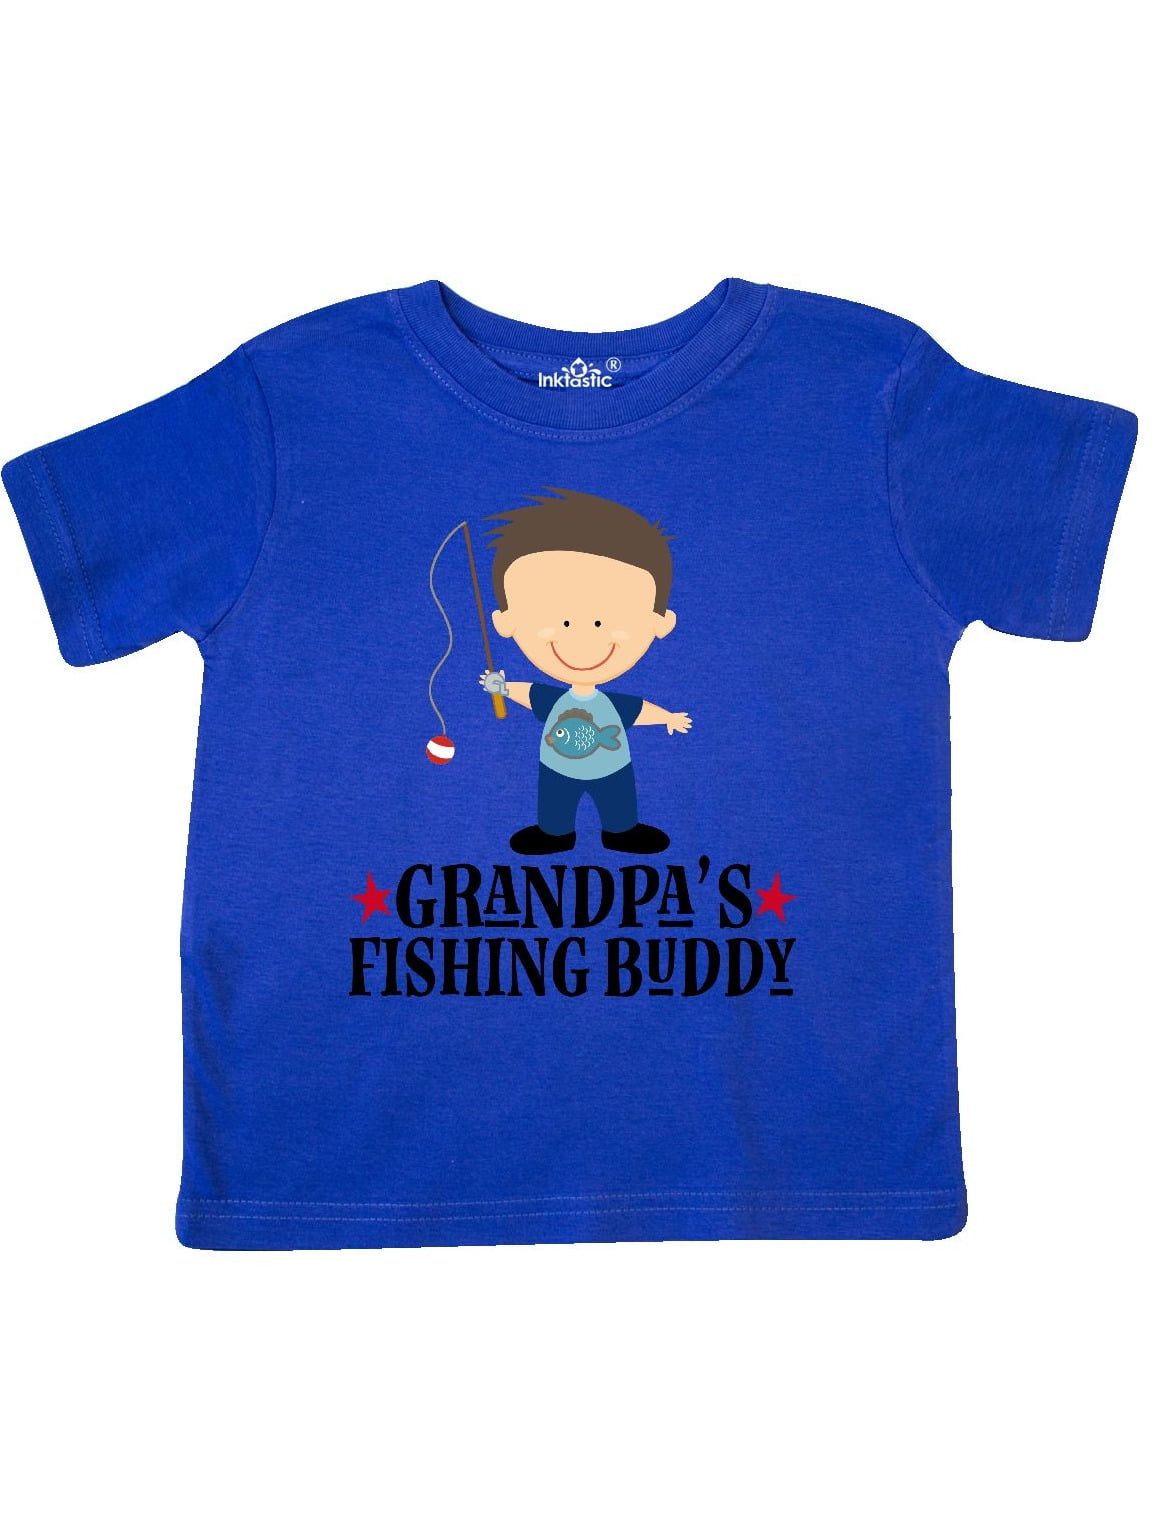 Inktastic Grandpa's Fishing Buddy With White Text Toddler T-Shirt Kids Little I 